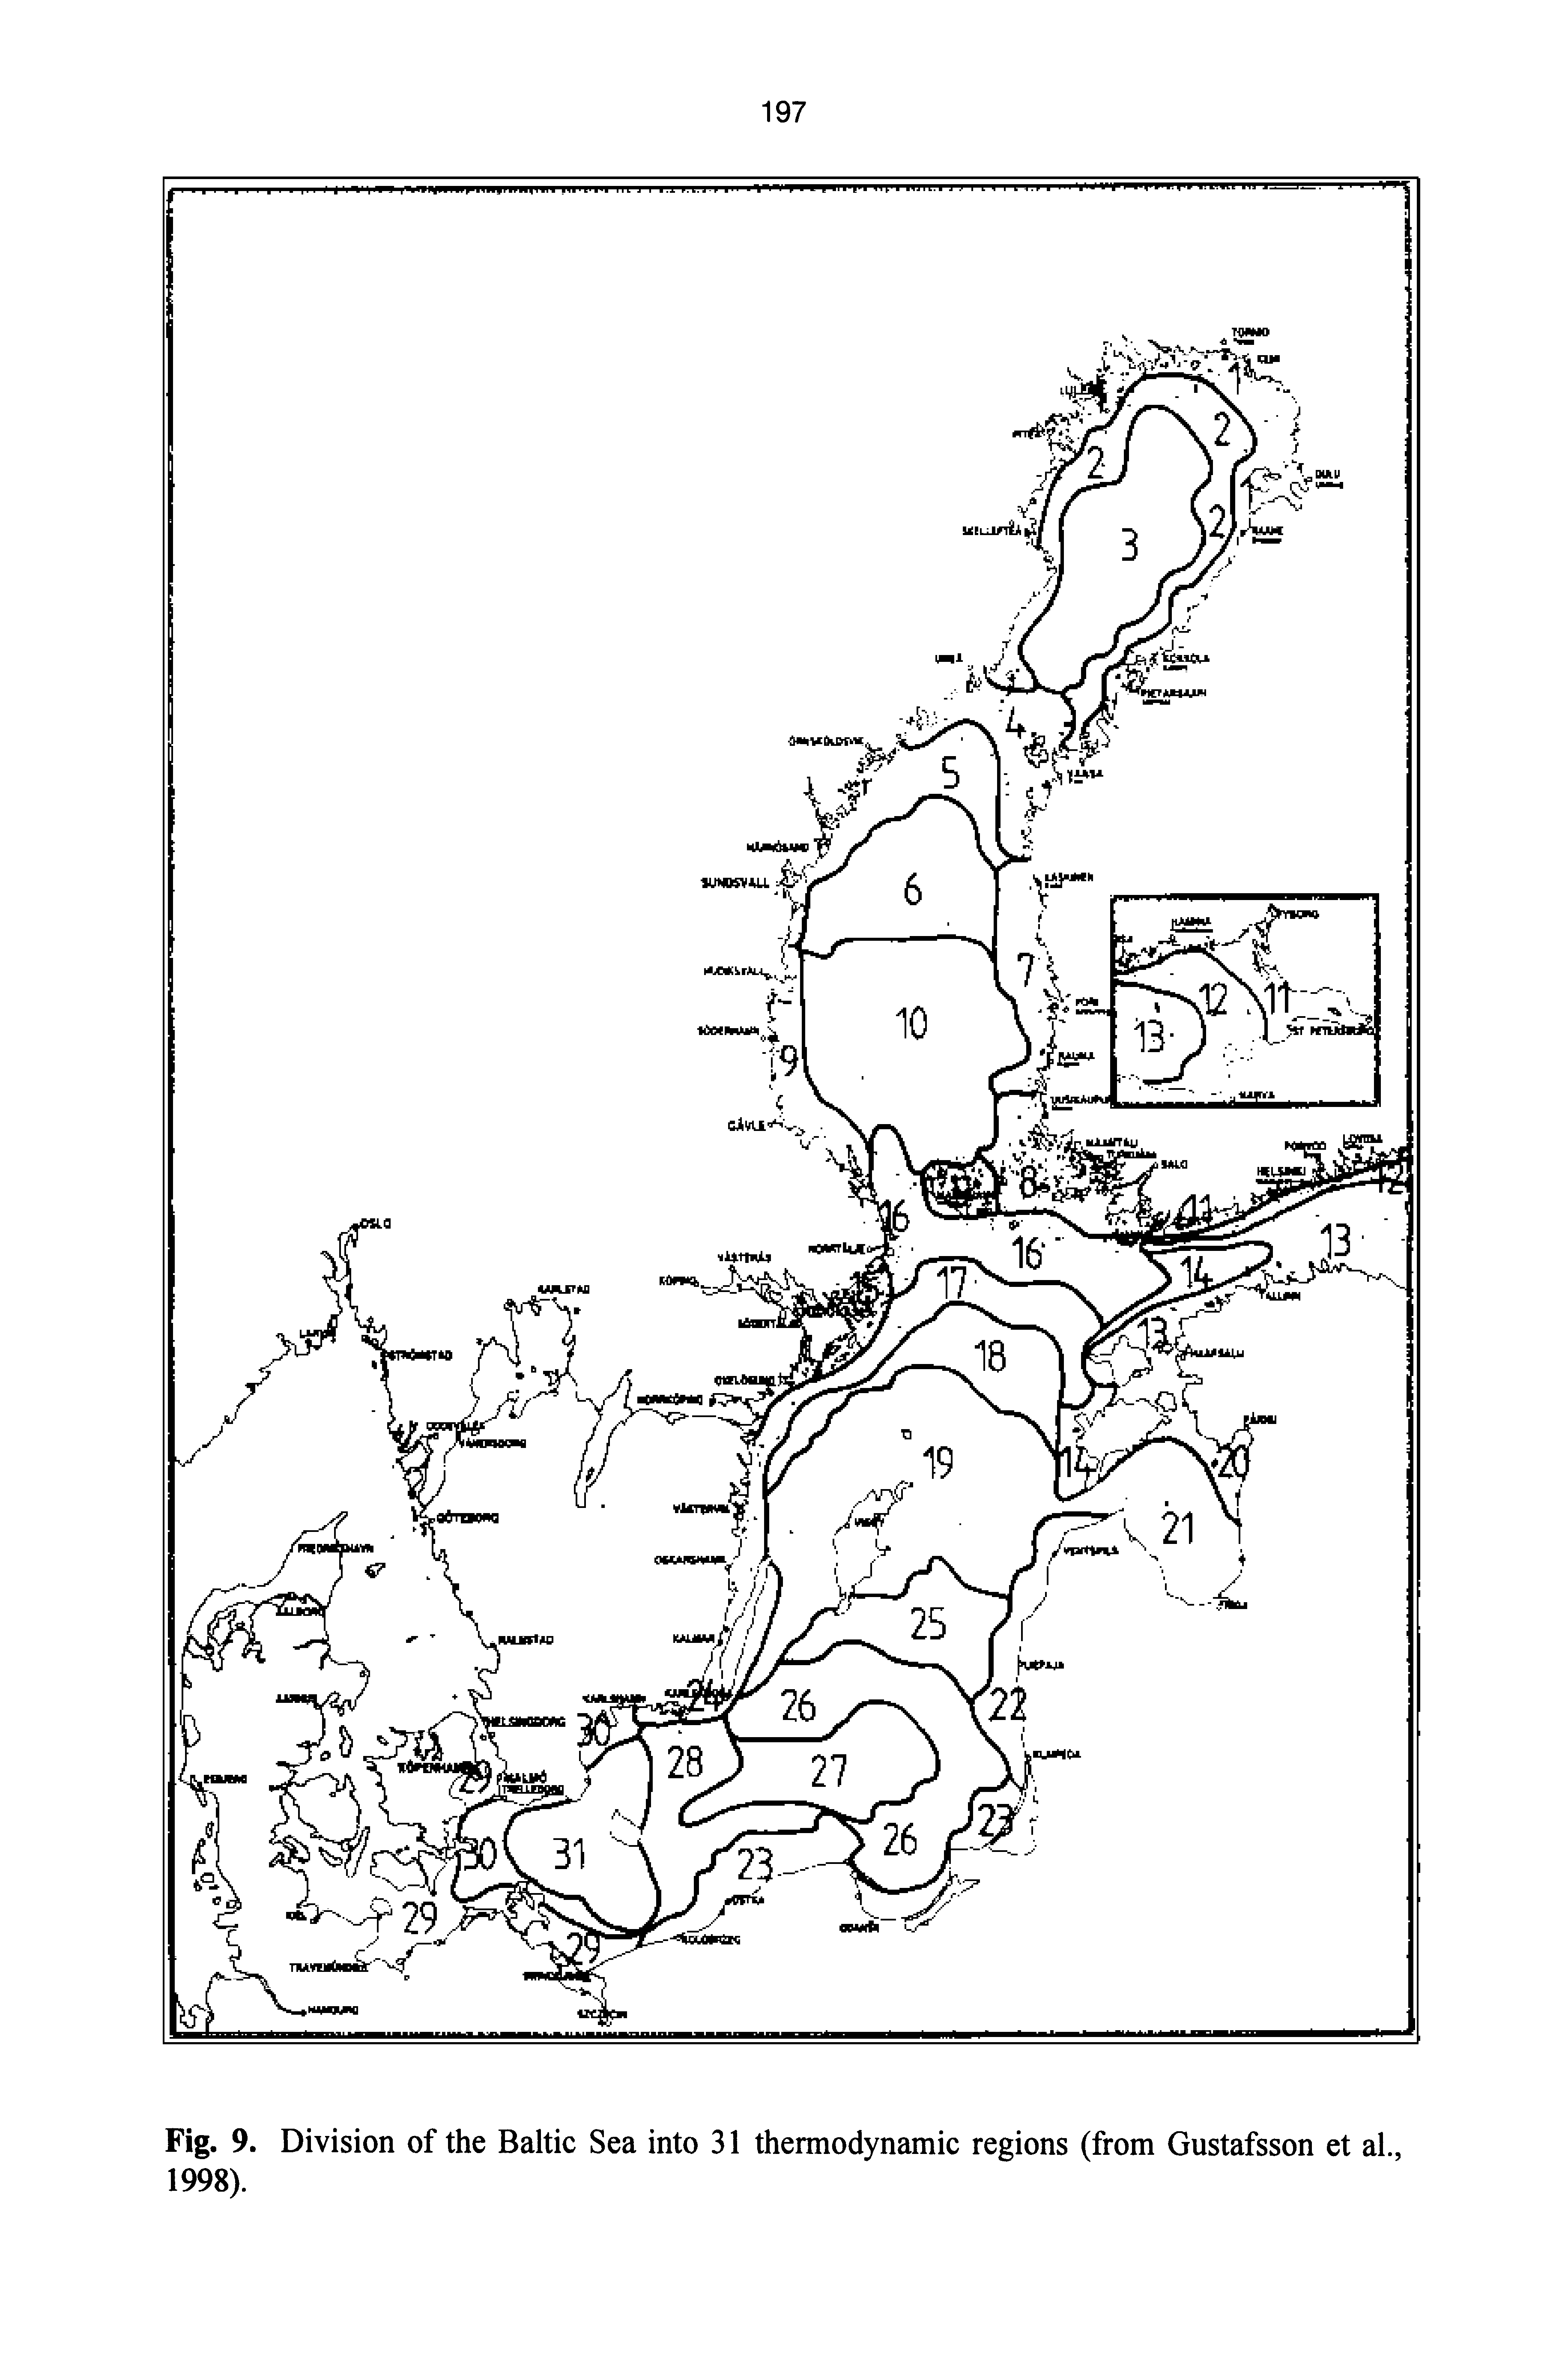 Fig. 9. Division of the Baltic Sea into 31 thermodynamic regions (from Gustafsson et al., 1998).